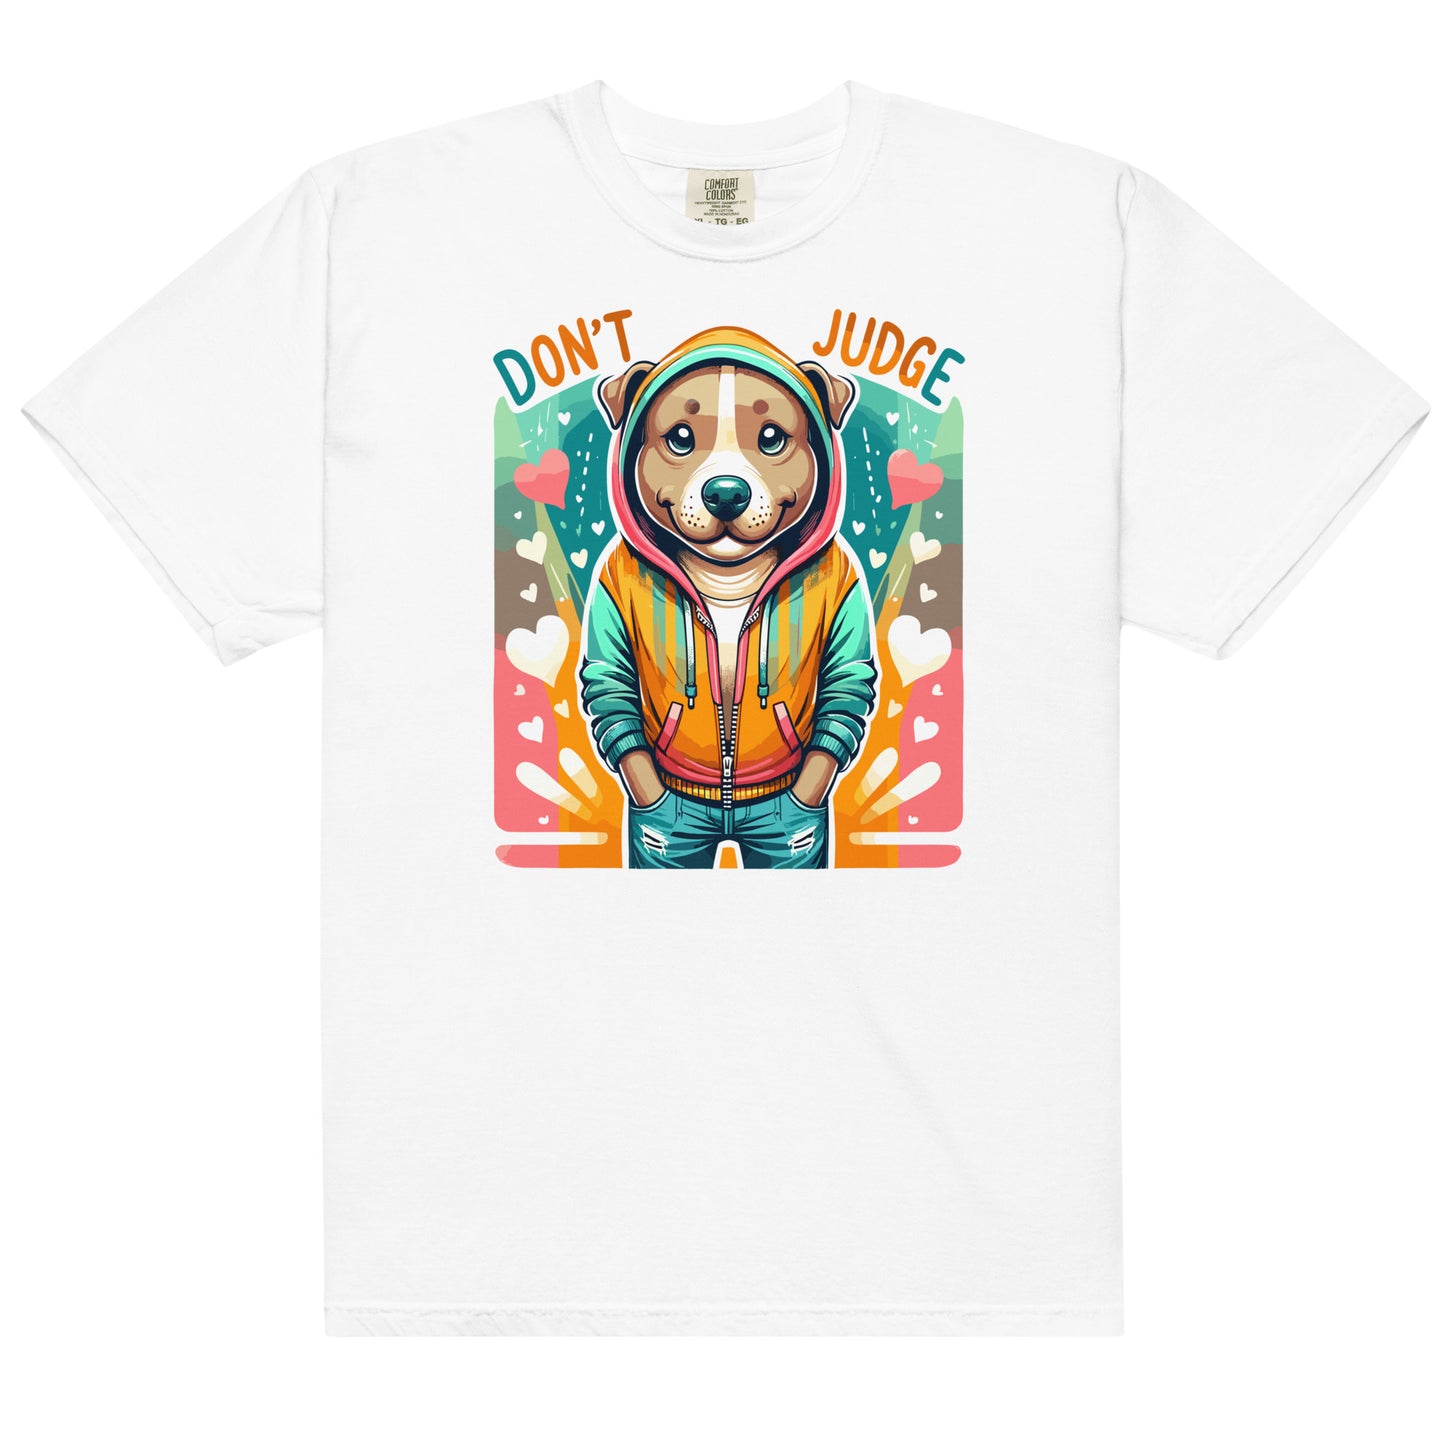 "Don't Judge" Pitbull Mom Relaxed Fit Women's T-Shirt - Pittie Choy